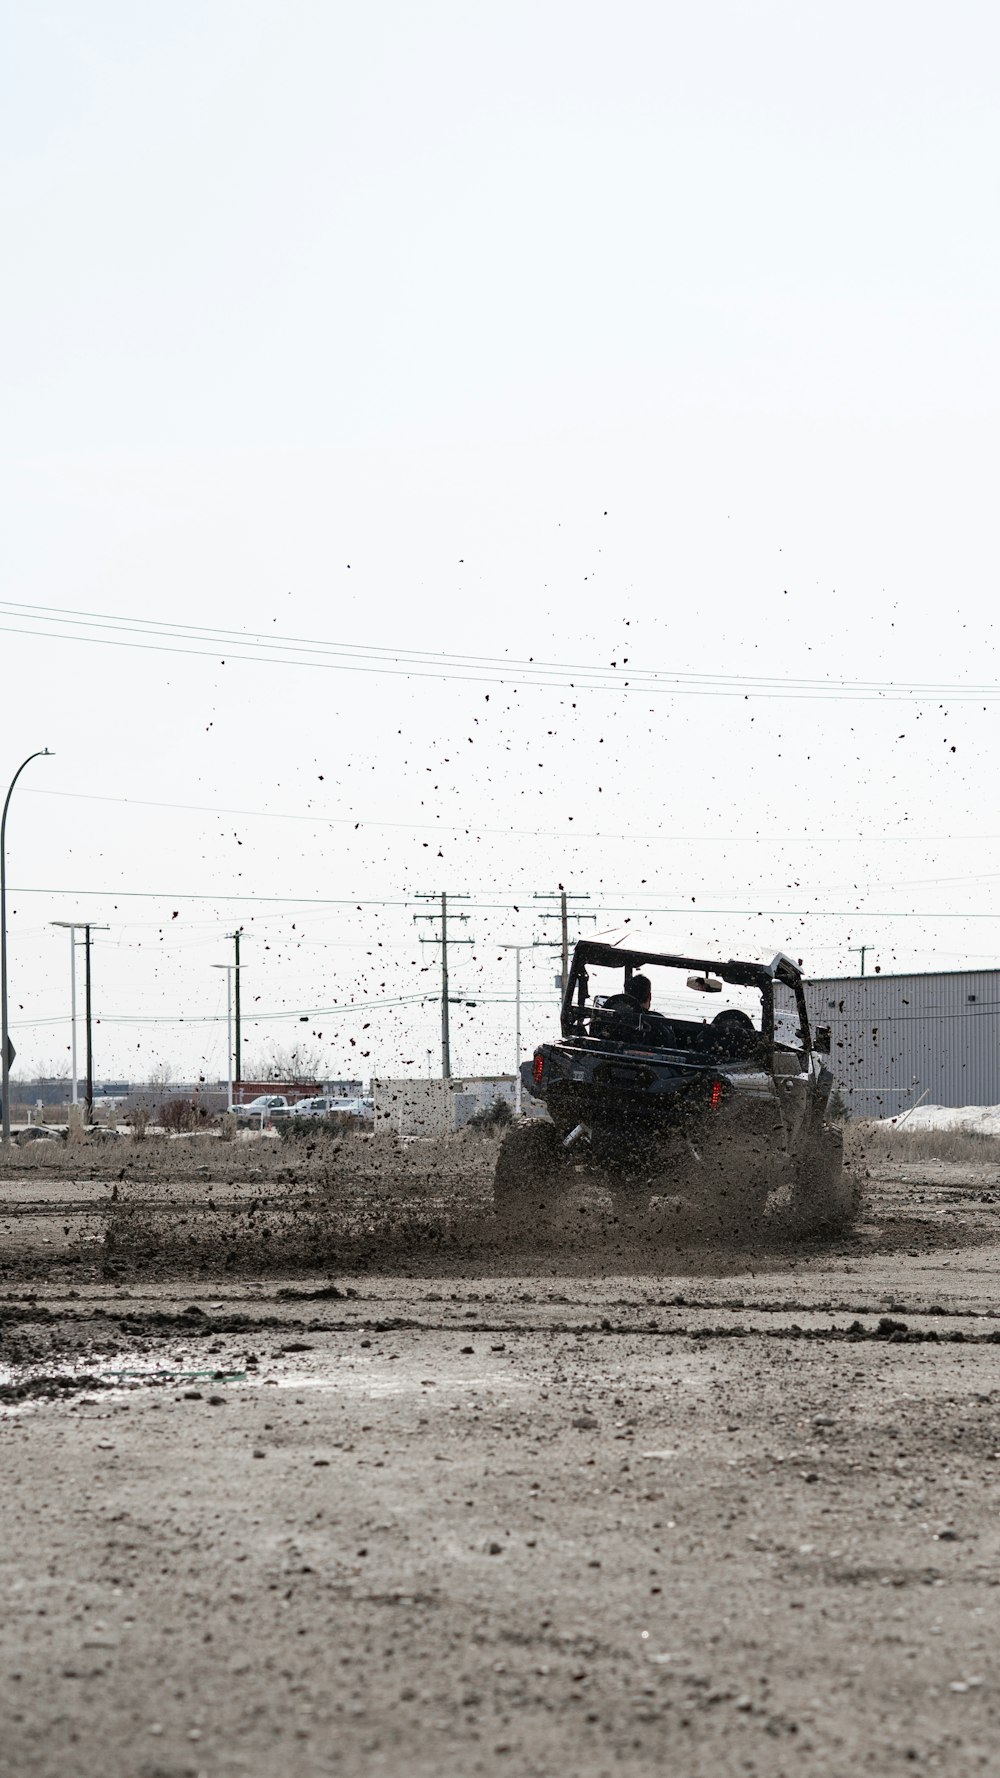 a buggy driving through a dirt field next to a building